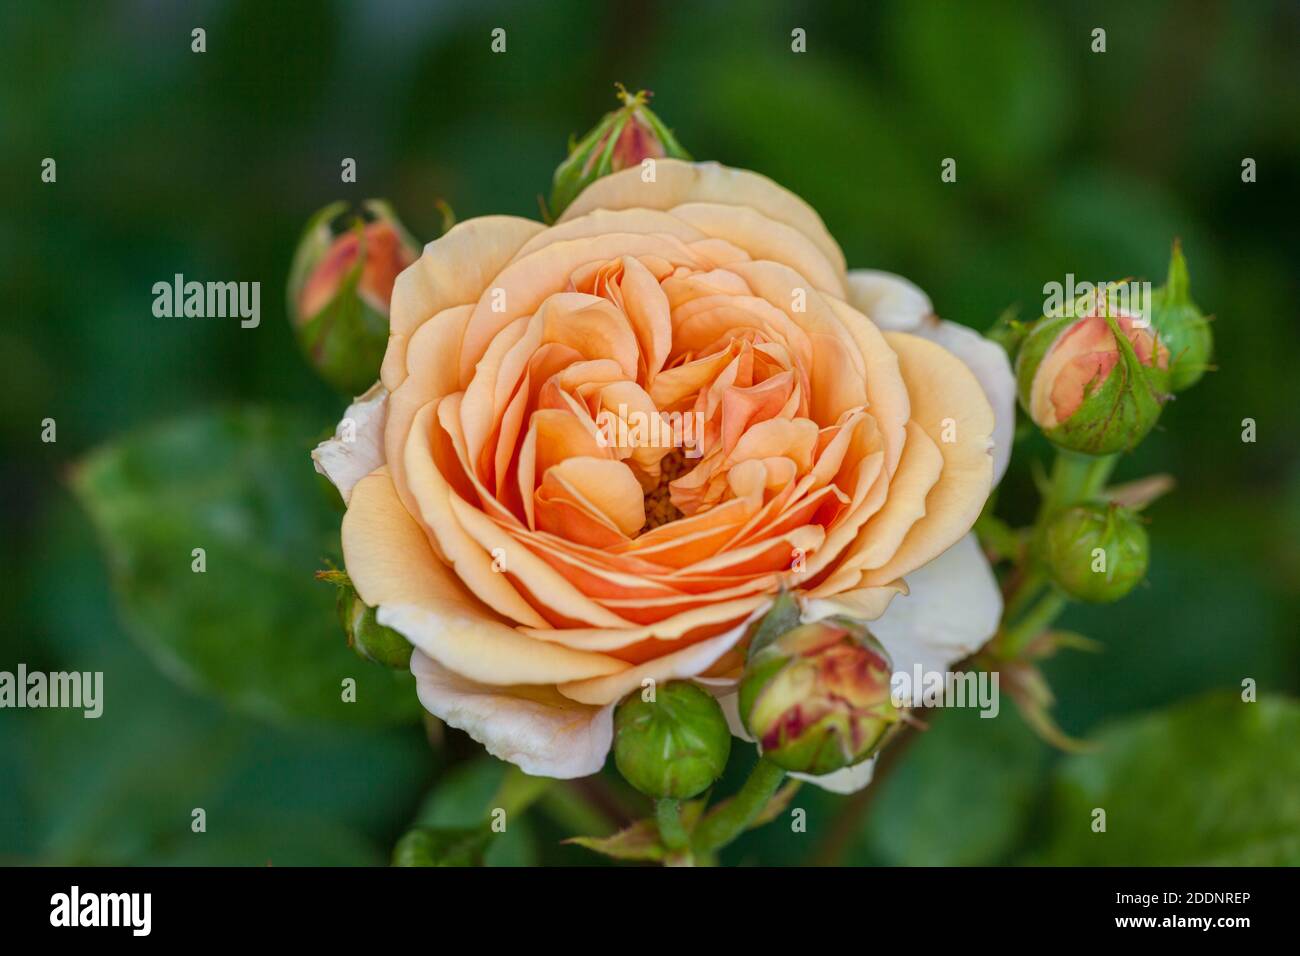 'Charles Austin, Ausfather' English Rose, fransk ros (Rosa) Banque D'Images